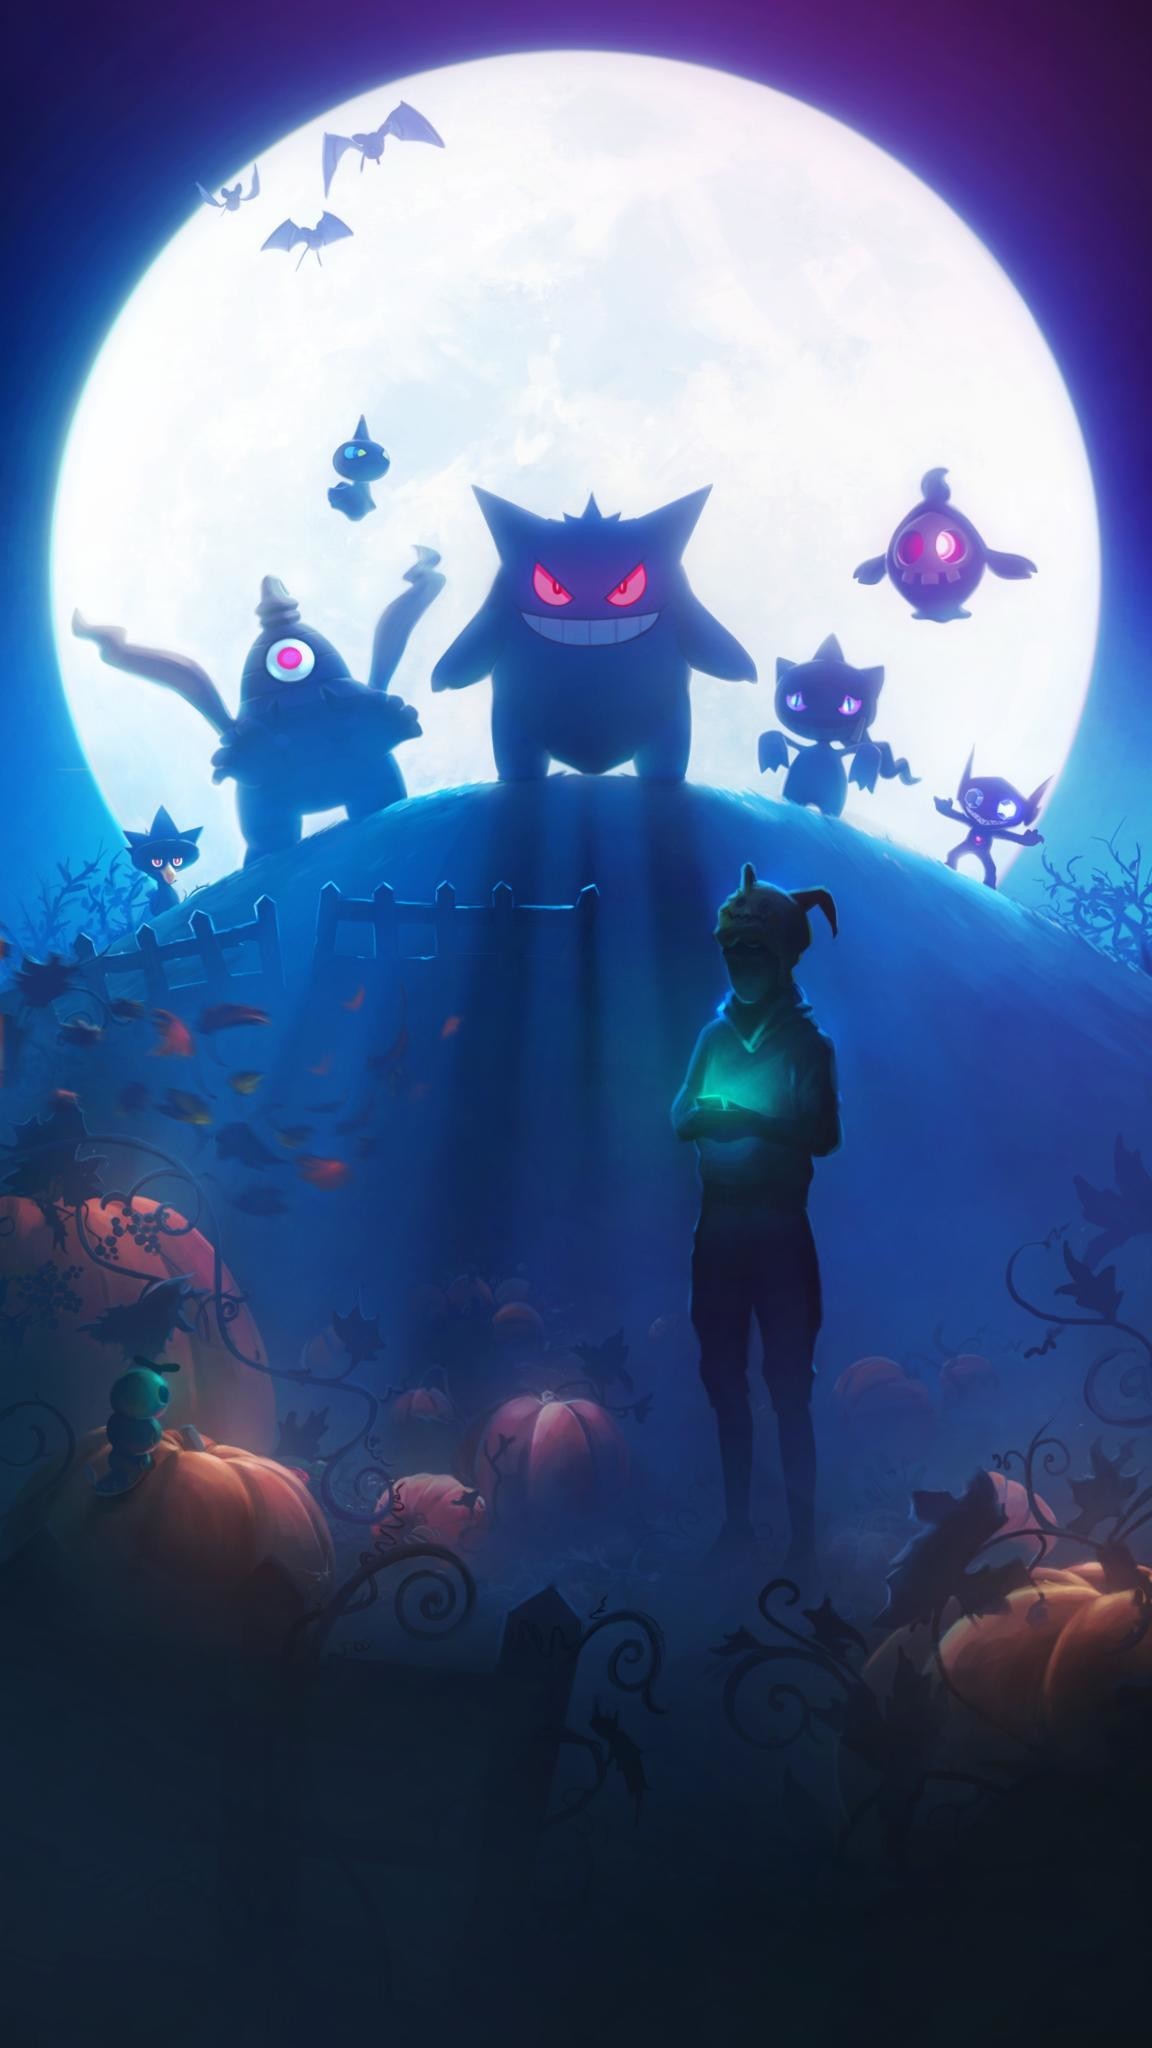 1152x2048 Gengar is back but this time he's brought Duskull, Dusclops, Shuppet,  Banette, and Sableye from Gen 3 with him. Oh, and a Mimikyu hat as well!